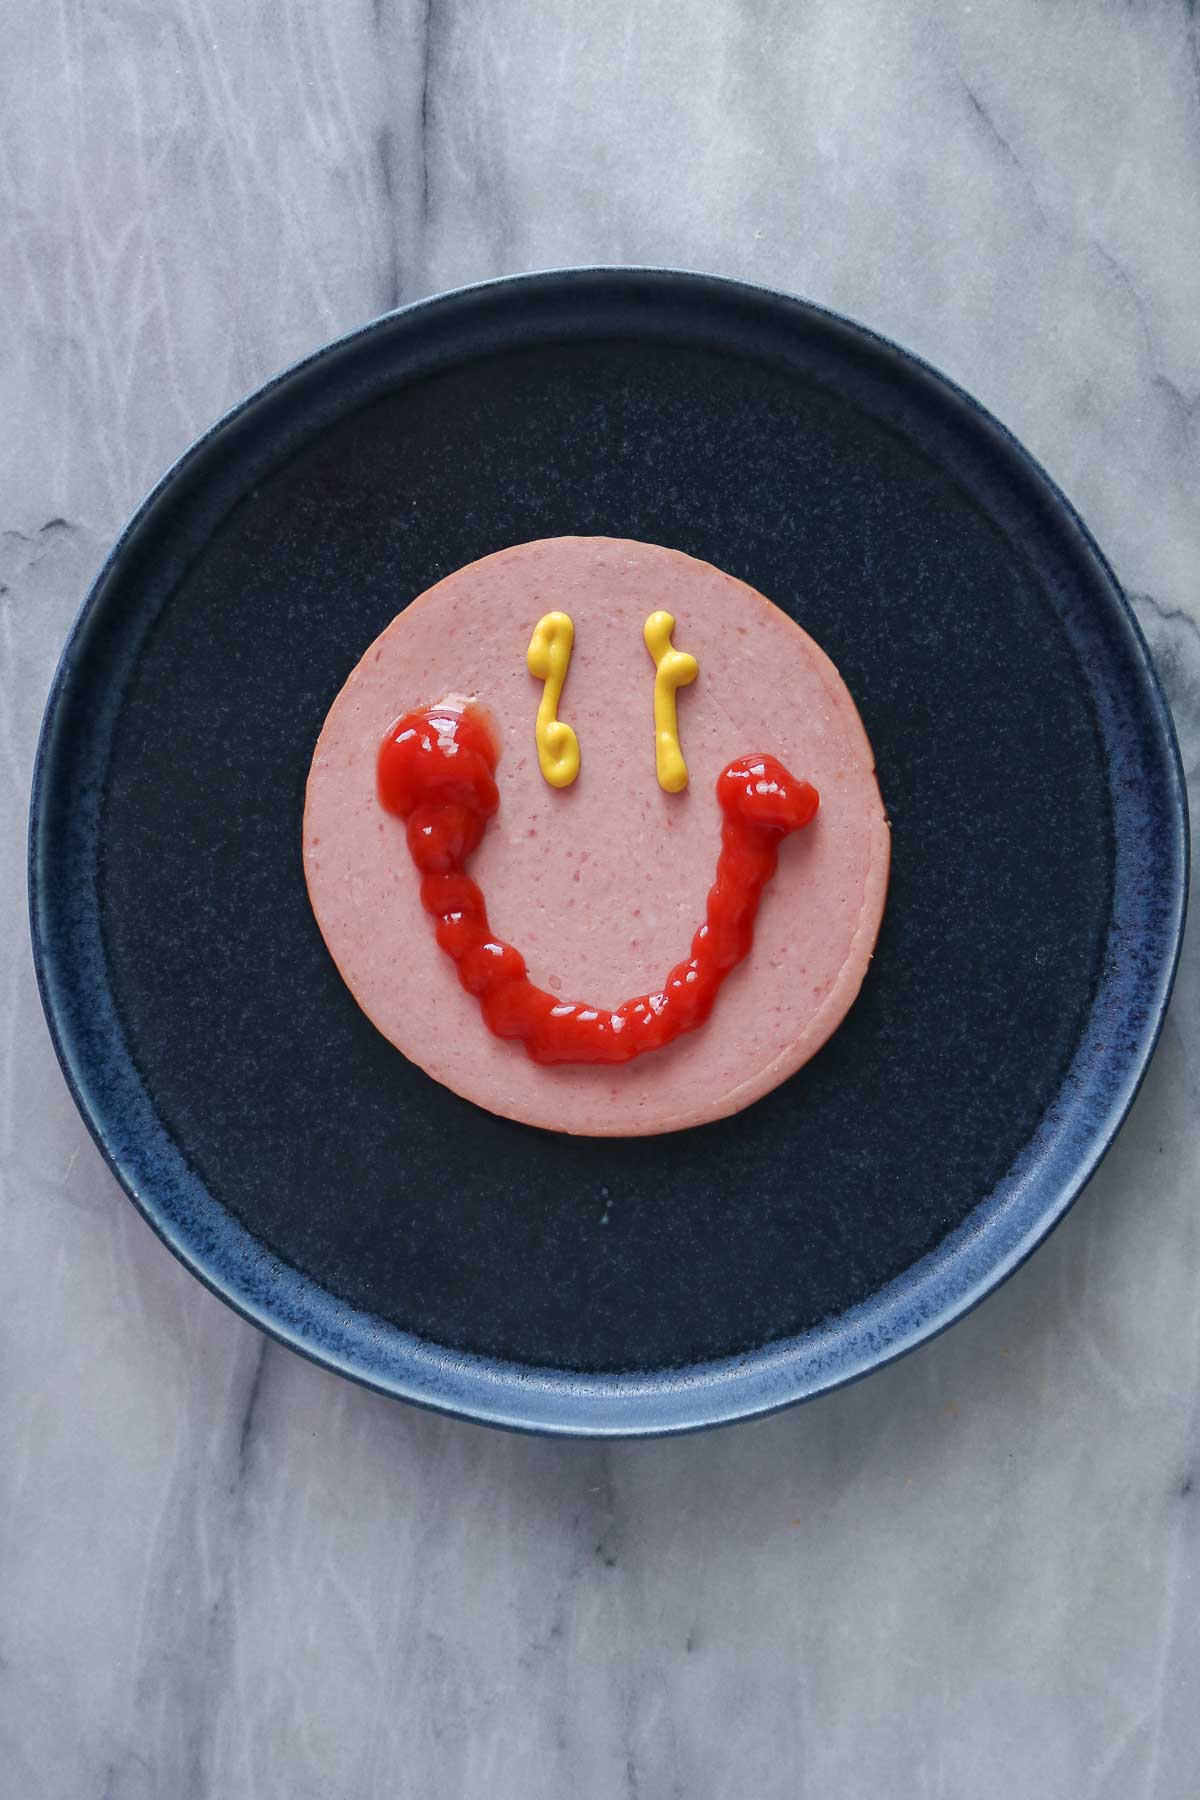 Slice of bologna on a blue plate with a smiling face drawn on it with mustard and ketchup.